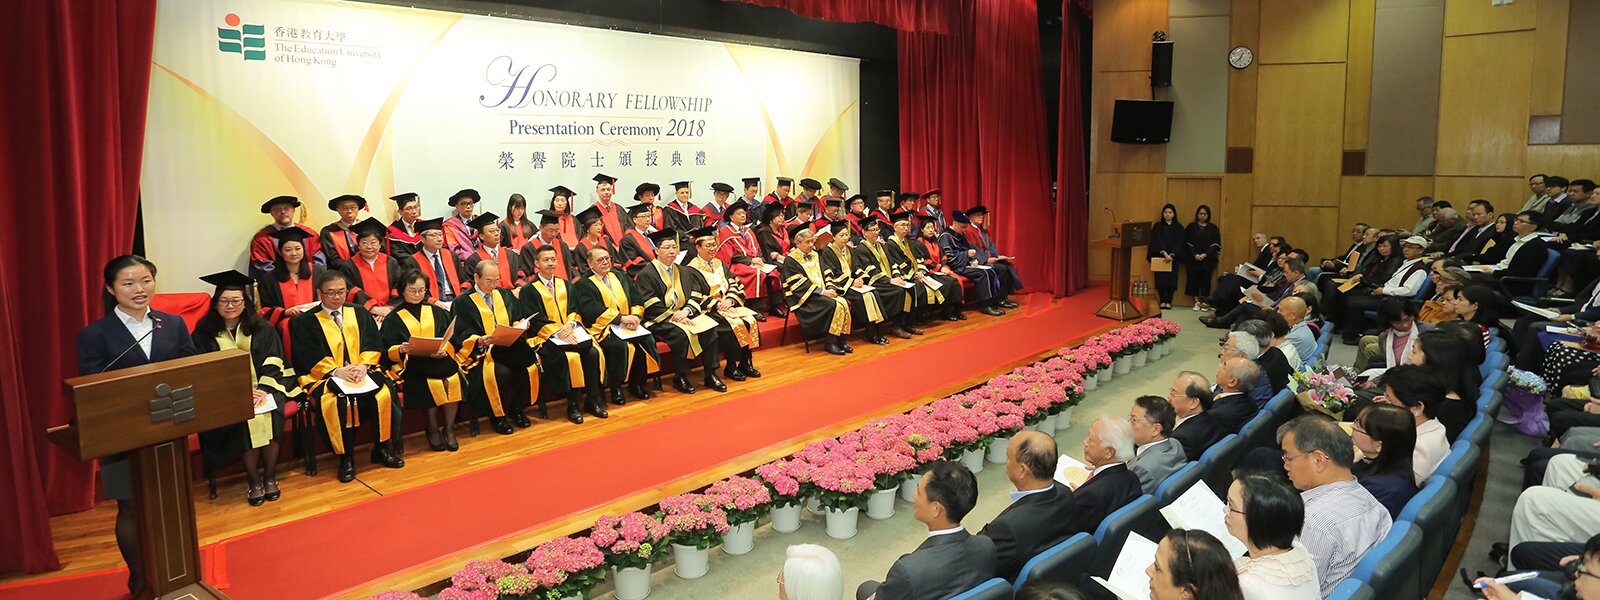 EdUHK Confers Honorary Fellowships on Five Distinguished Individuals